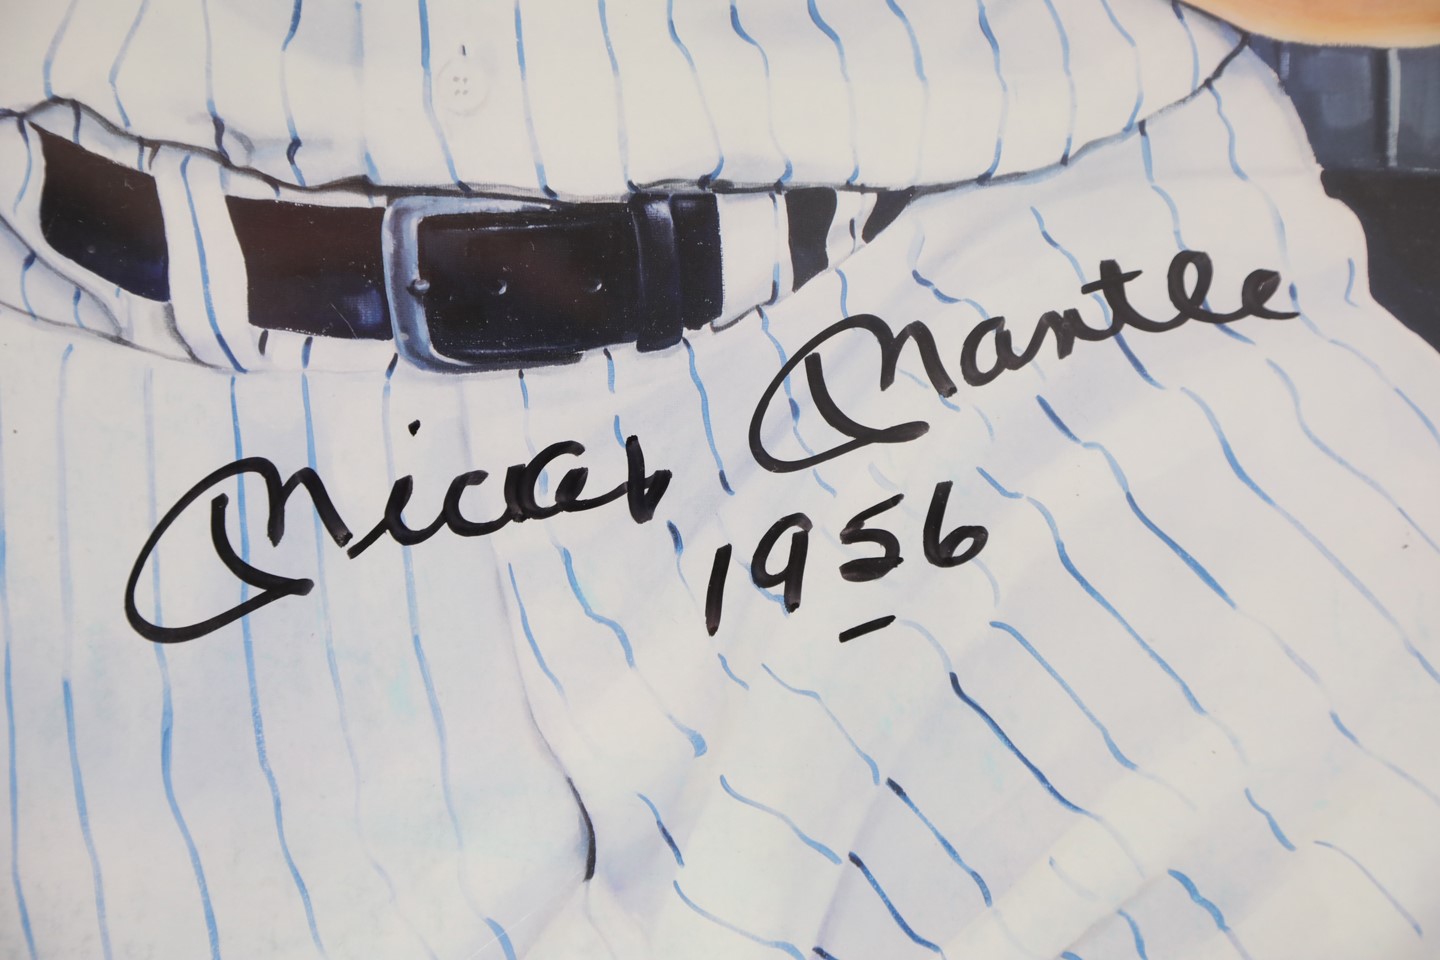 Stunning Mickey Mantle "1956" Triple Crown Signed Poster from the Greer Johnson Estate (JSA)